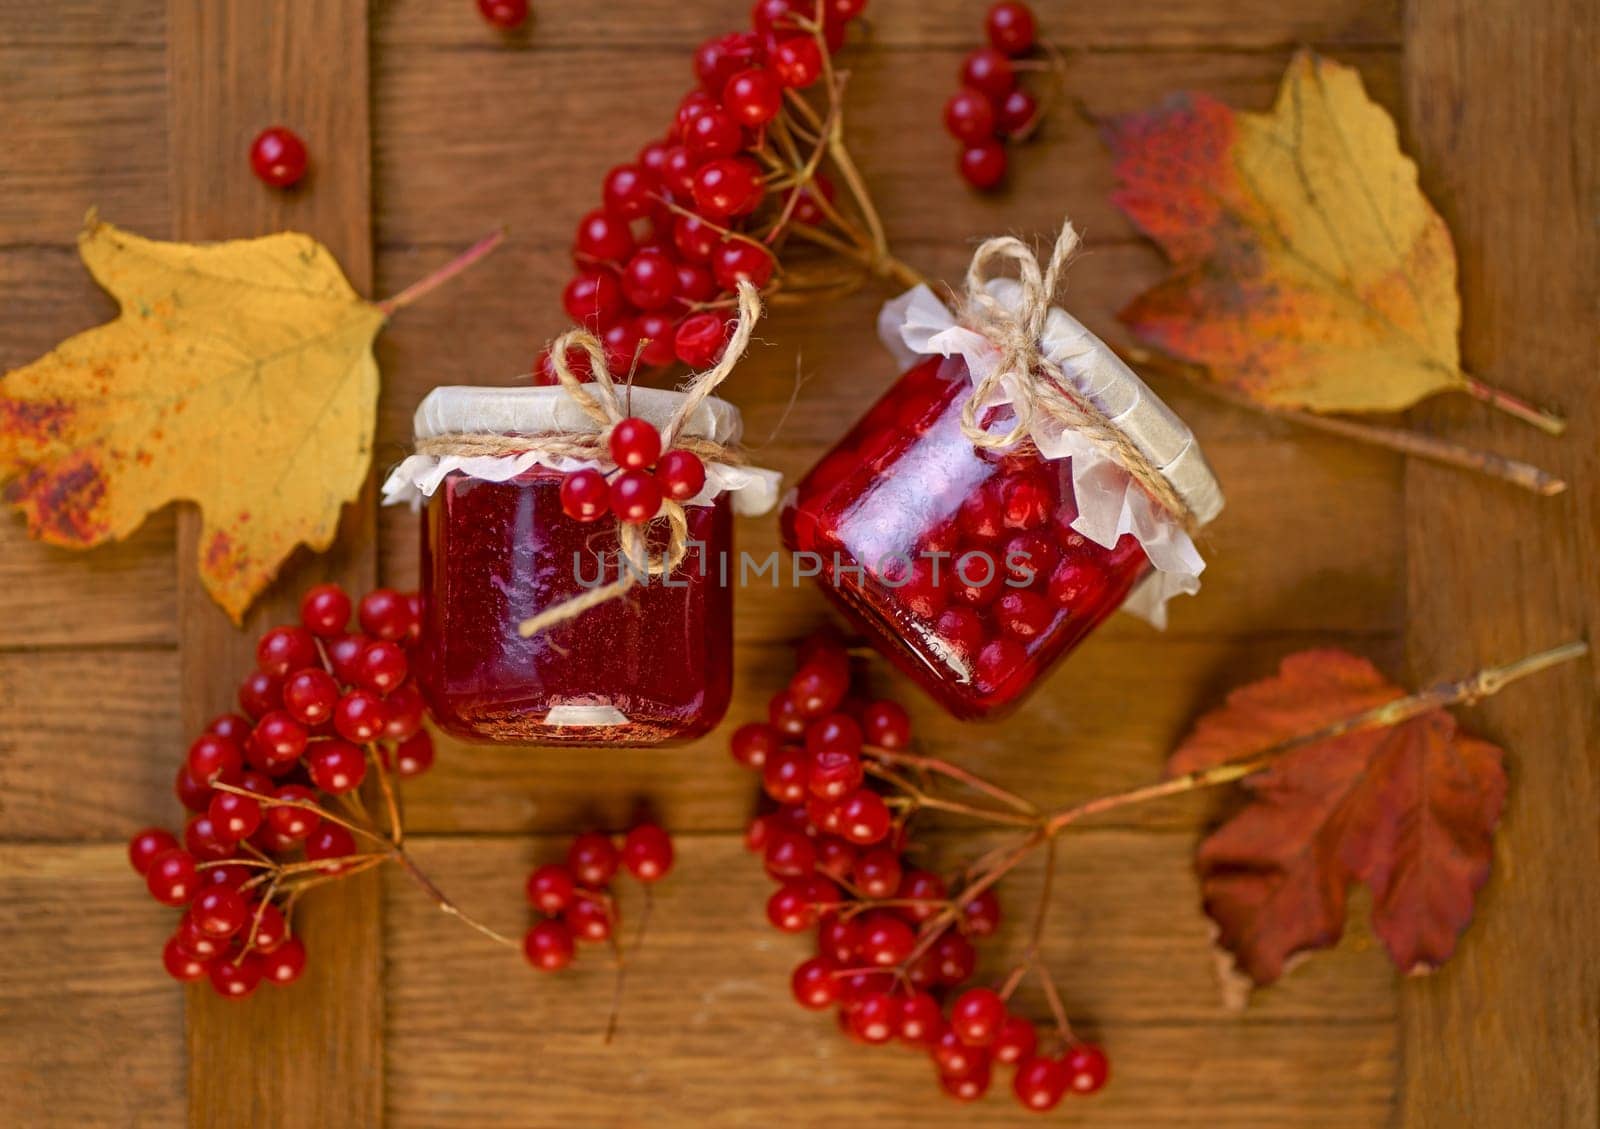 Viburnum fruit jam in a glass jar on a wooden table, preparations for the winter